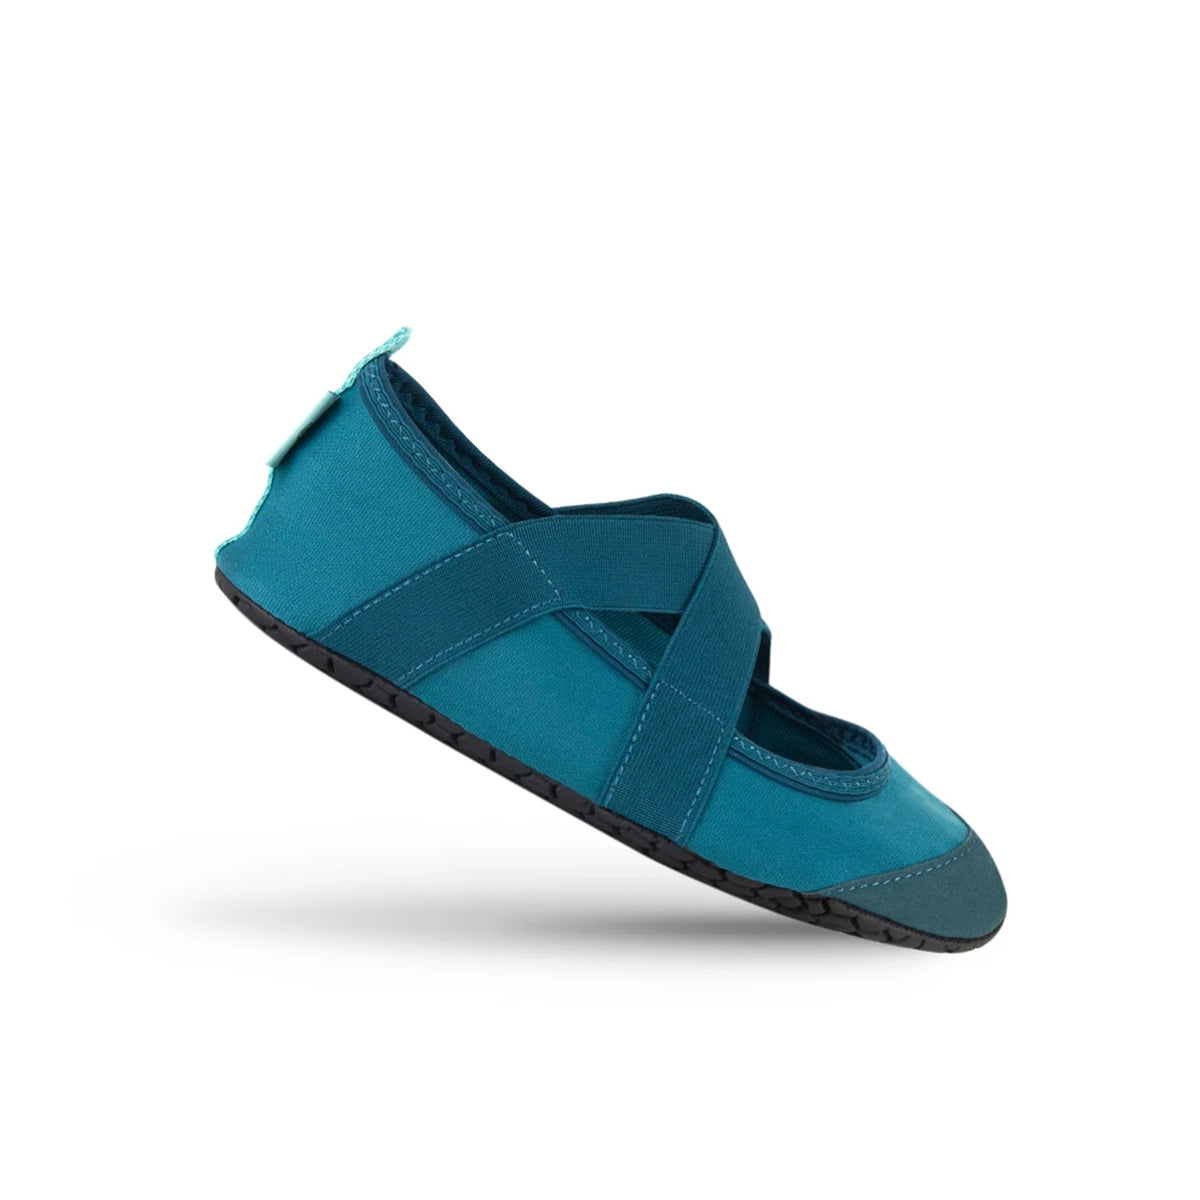 FitKicks Crossover Teal Shoes